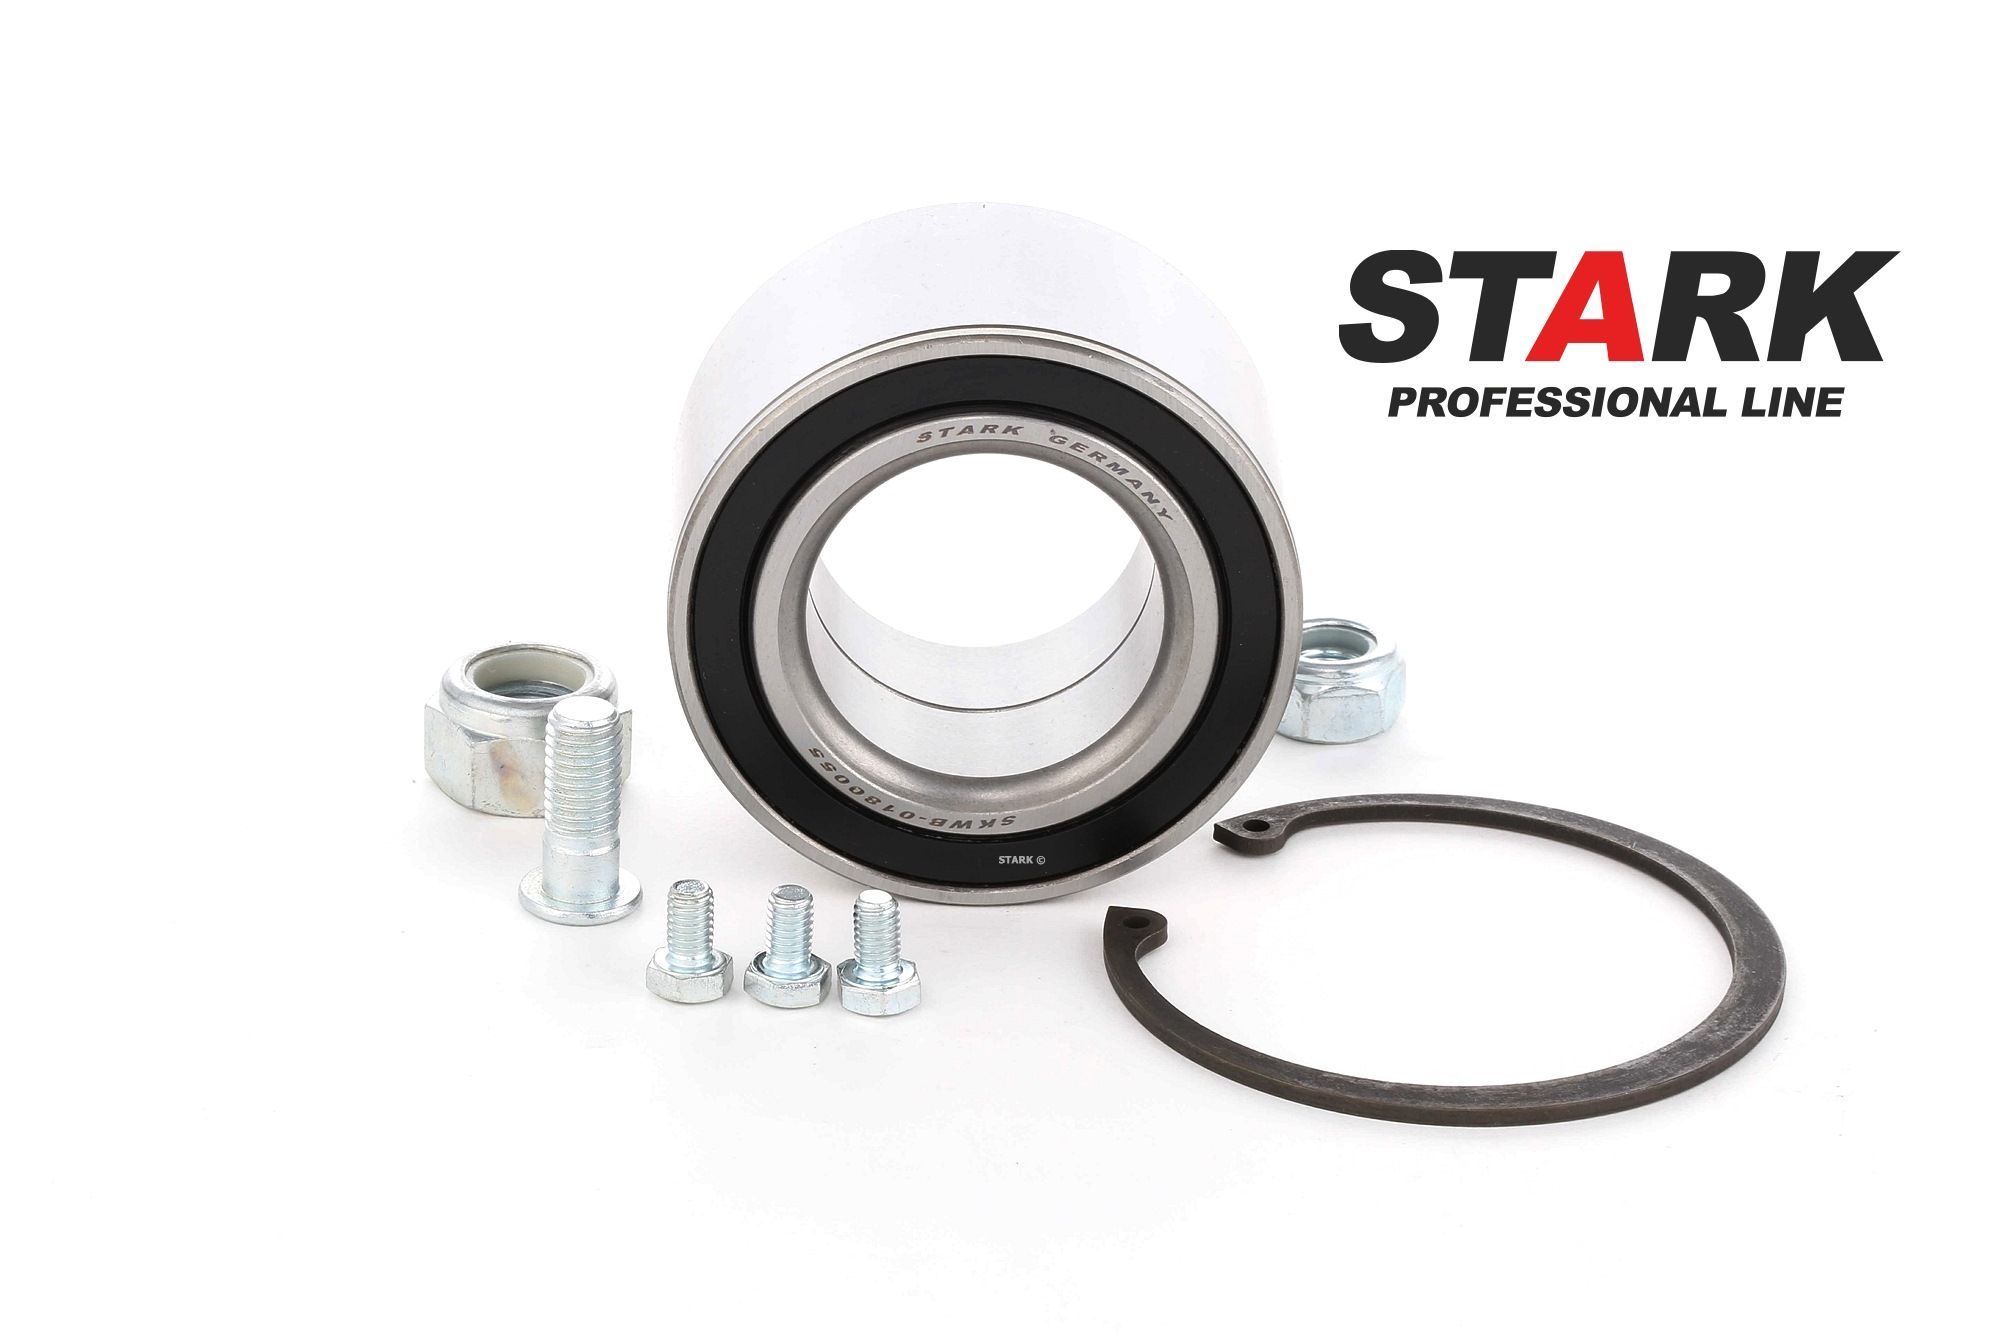 STARK SKWB-0180055 Wheel bearing kit Front axle both sides, Rear Axle both sides, with screw